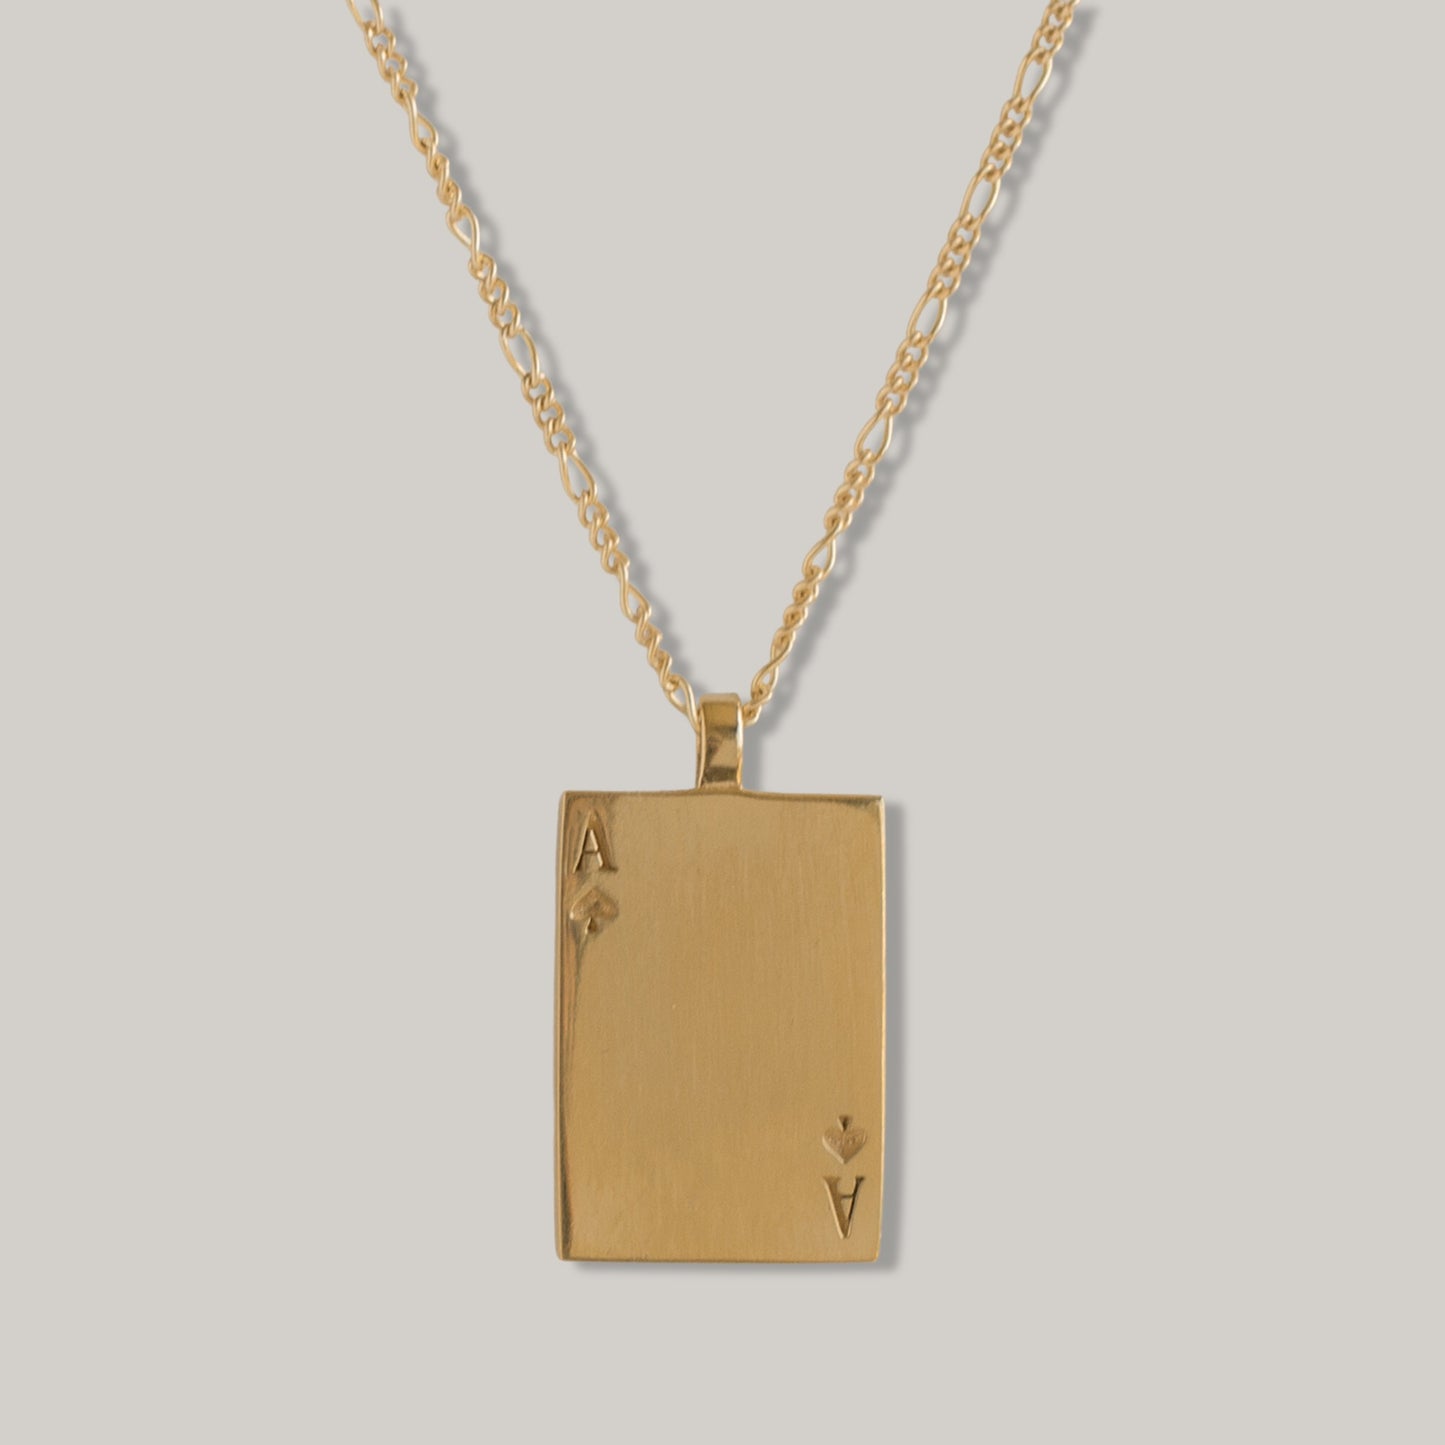 MEREWIF ACE OF SPADES NECKLACE